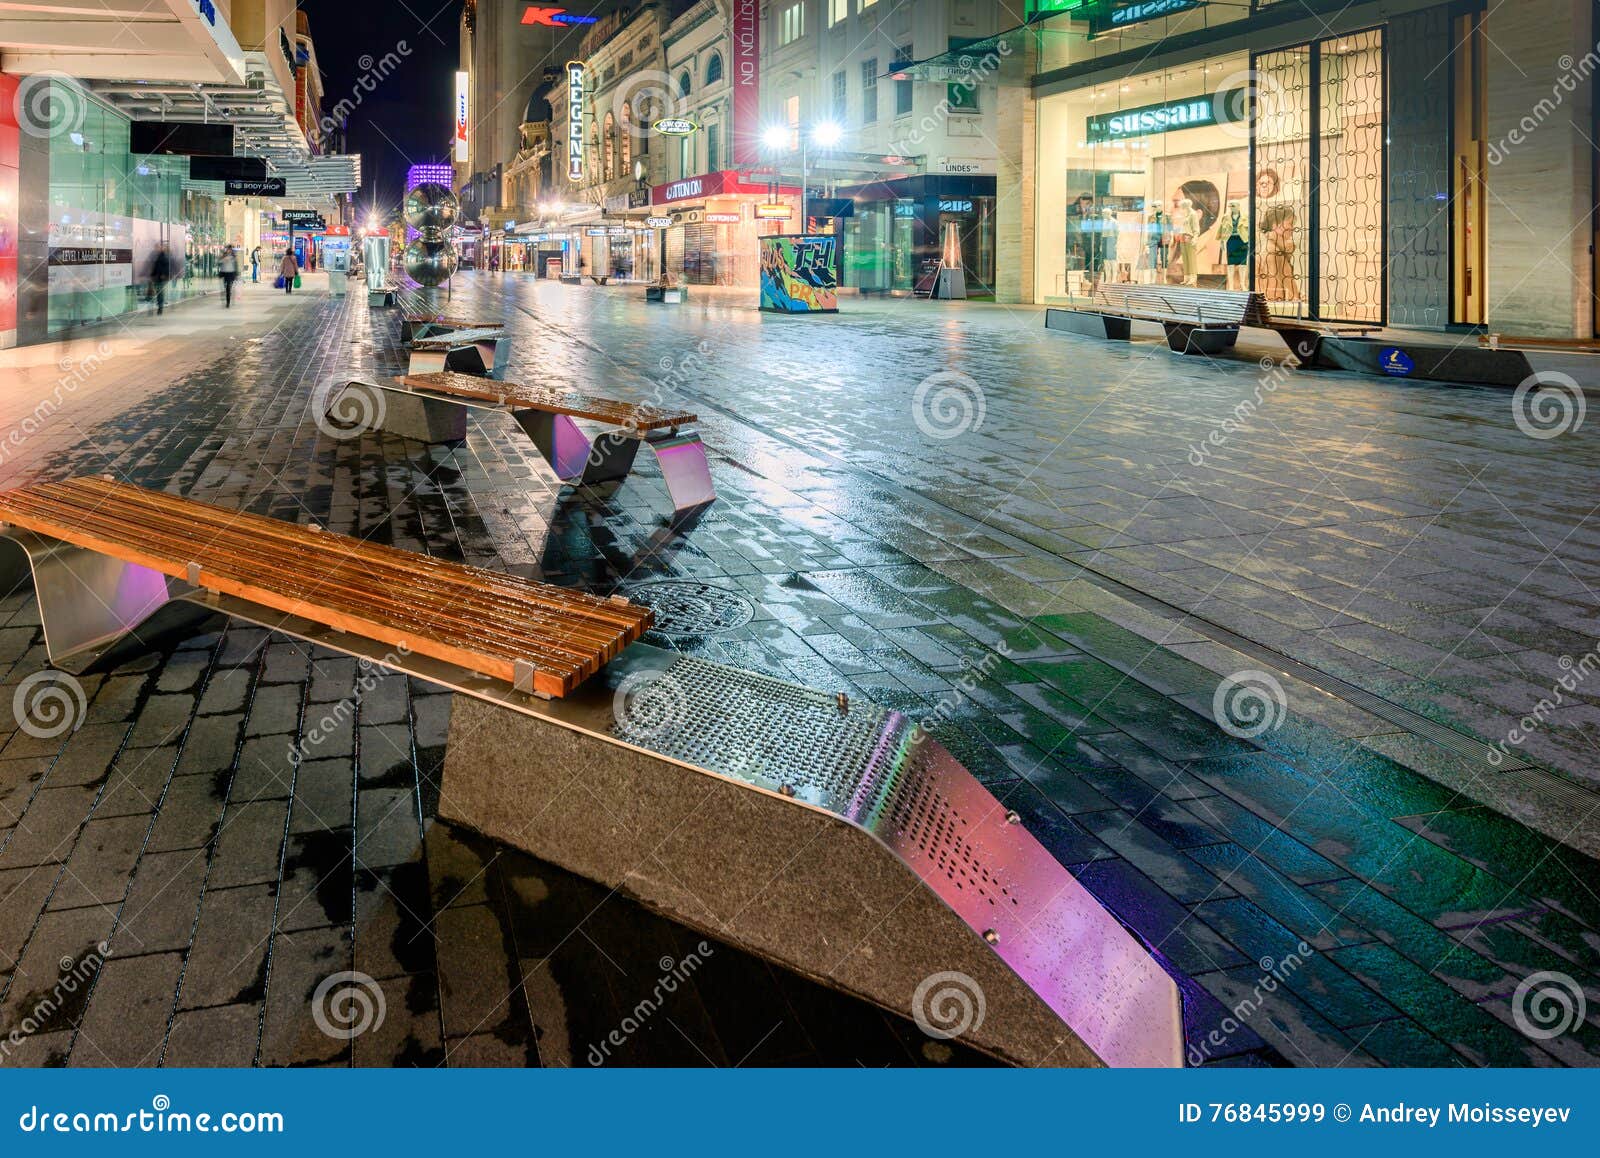 Rundle Mall at night time editorial stock image. Image of display